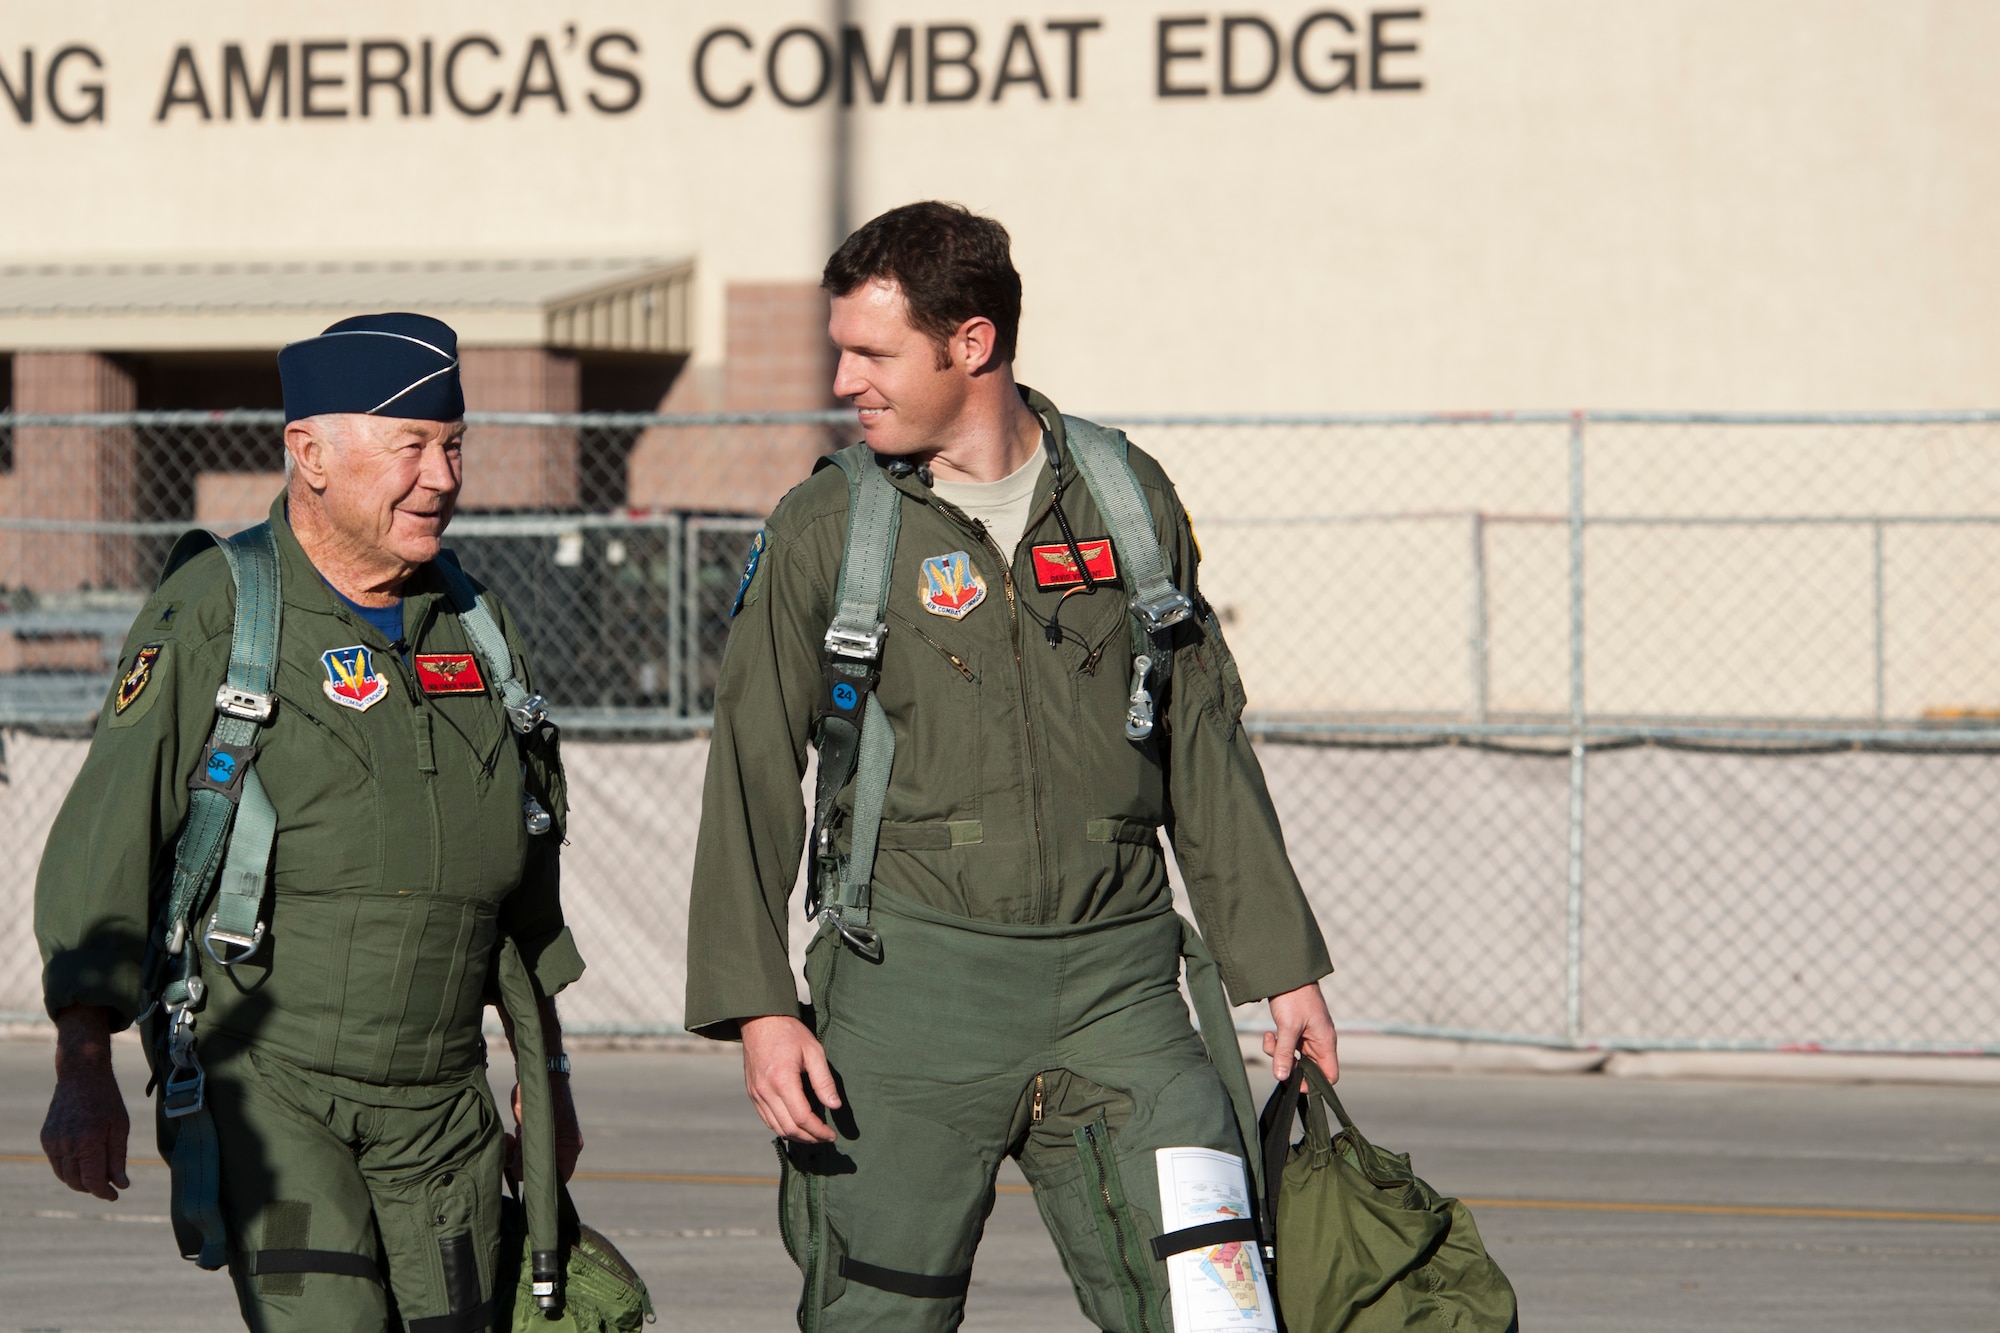 Retired United States Air Force Brig. Gen. Charles E. "Chuck" Yeager and Capt. David Vincent, 65th Aggressor Squadron pilot, walk to an F-15D Eagle Oct. 14, 2012, at Nellis Air Force Base, Nev. Yeager and Vincent commemorated the 65th anniversary of breaking of the sound barrier by flying from Las Vegas to Edwards AFB in southern California. (U.S. Air Force photo by Lawrence Crespo)